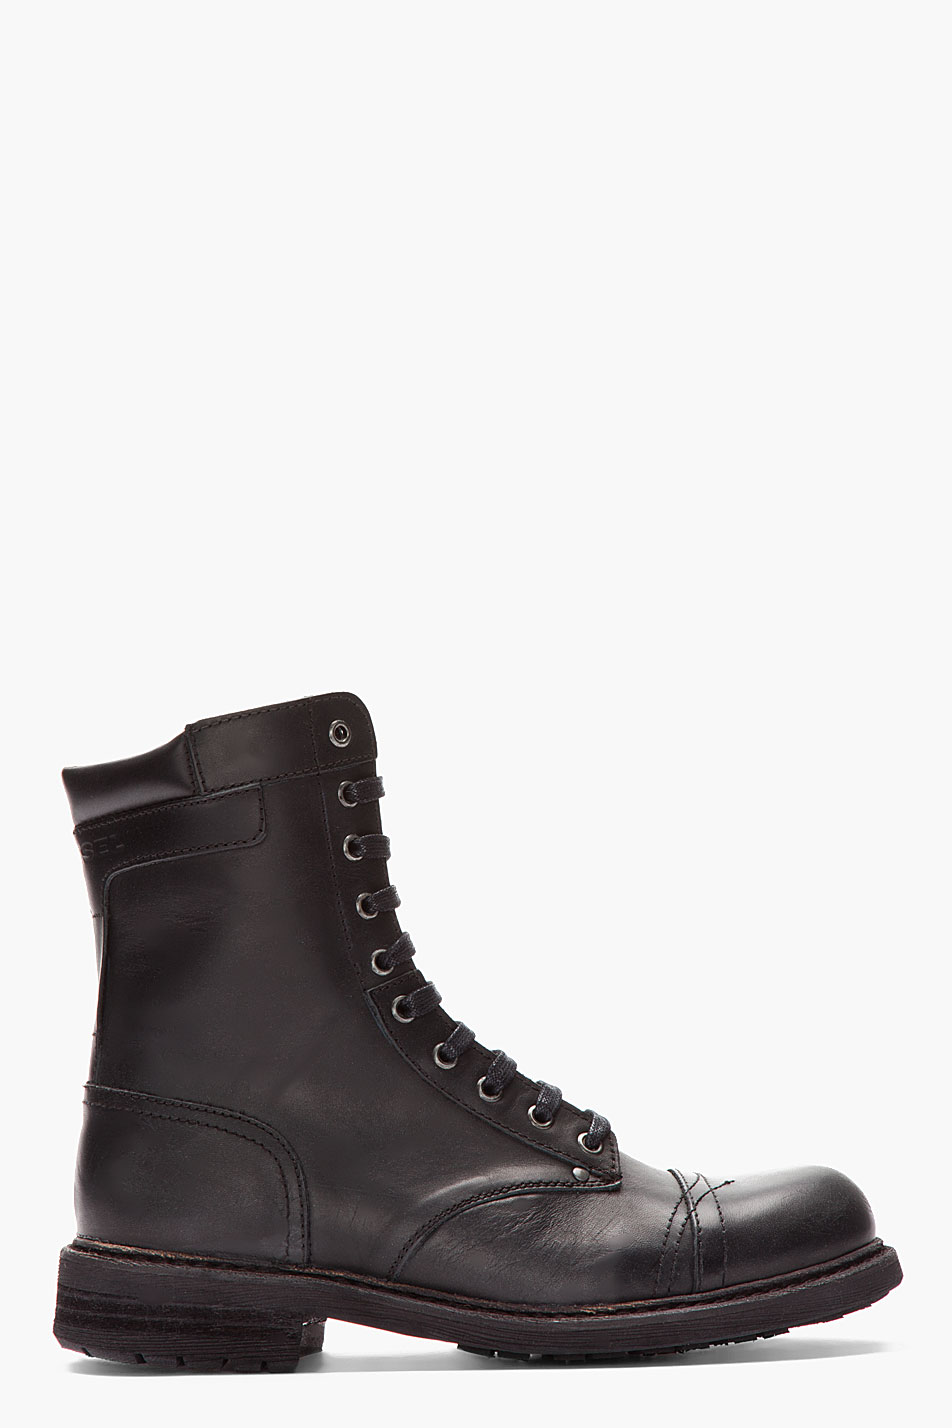 Diesel Black Leather Cassidy Combat Boots in Black for Men | Lyst